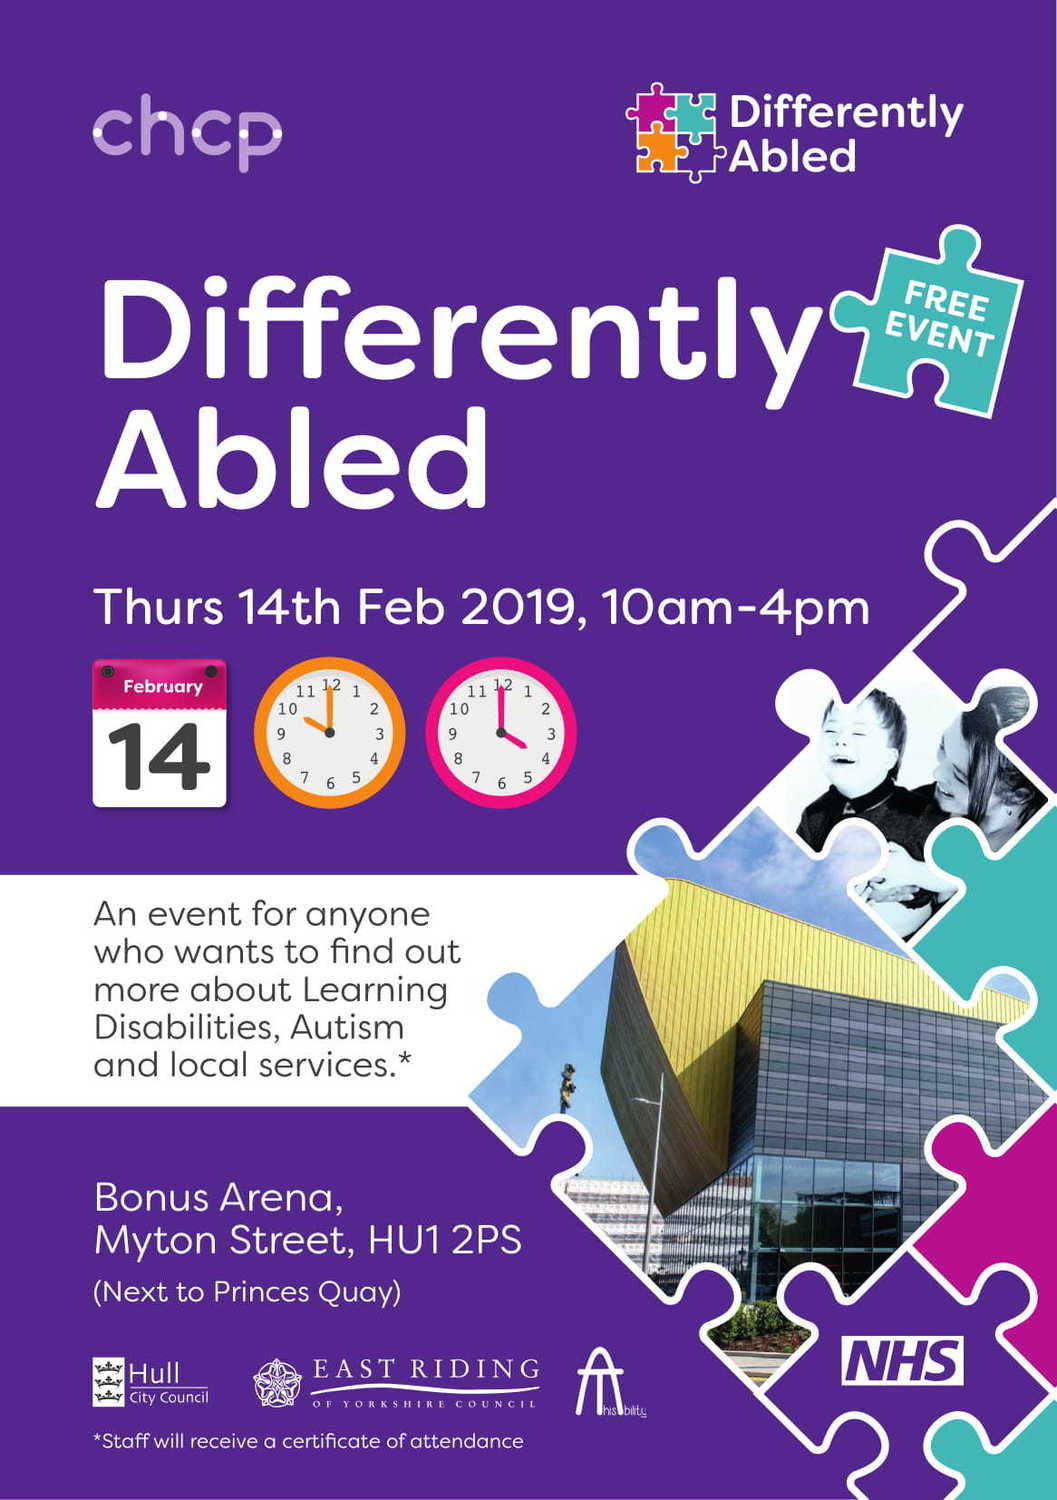 A5 Flyer Differently Abled 2019